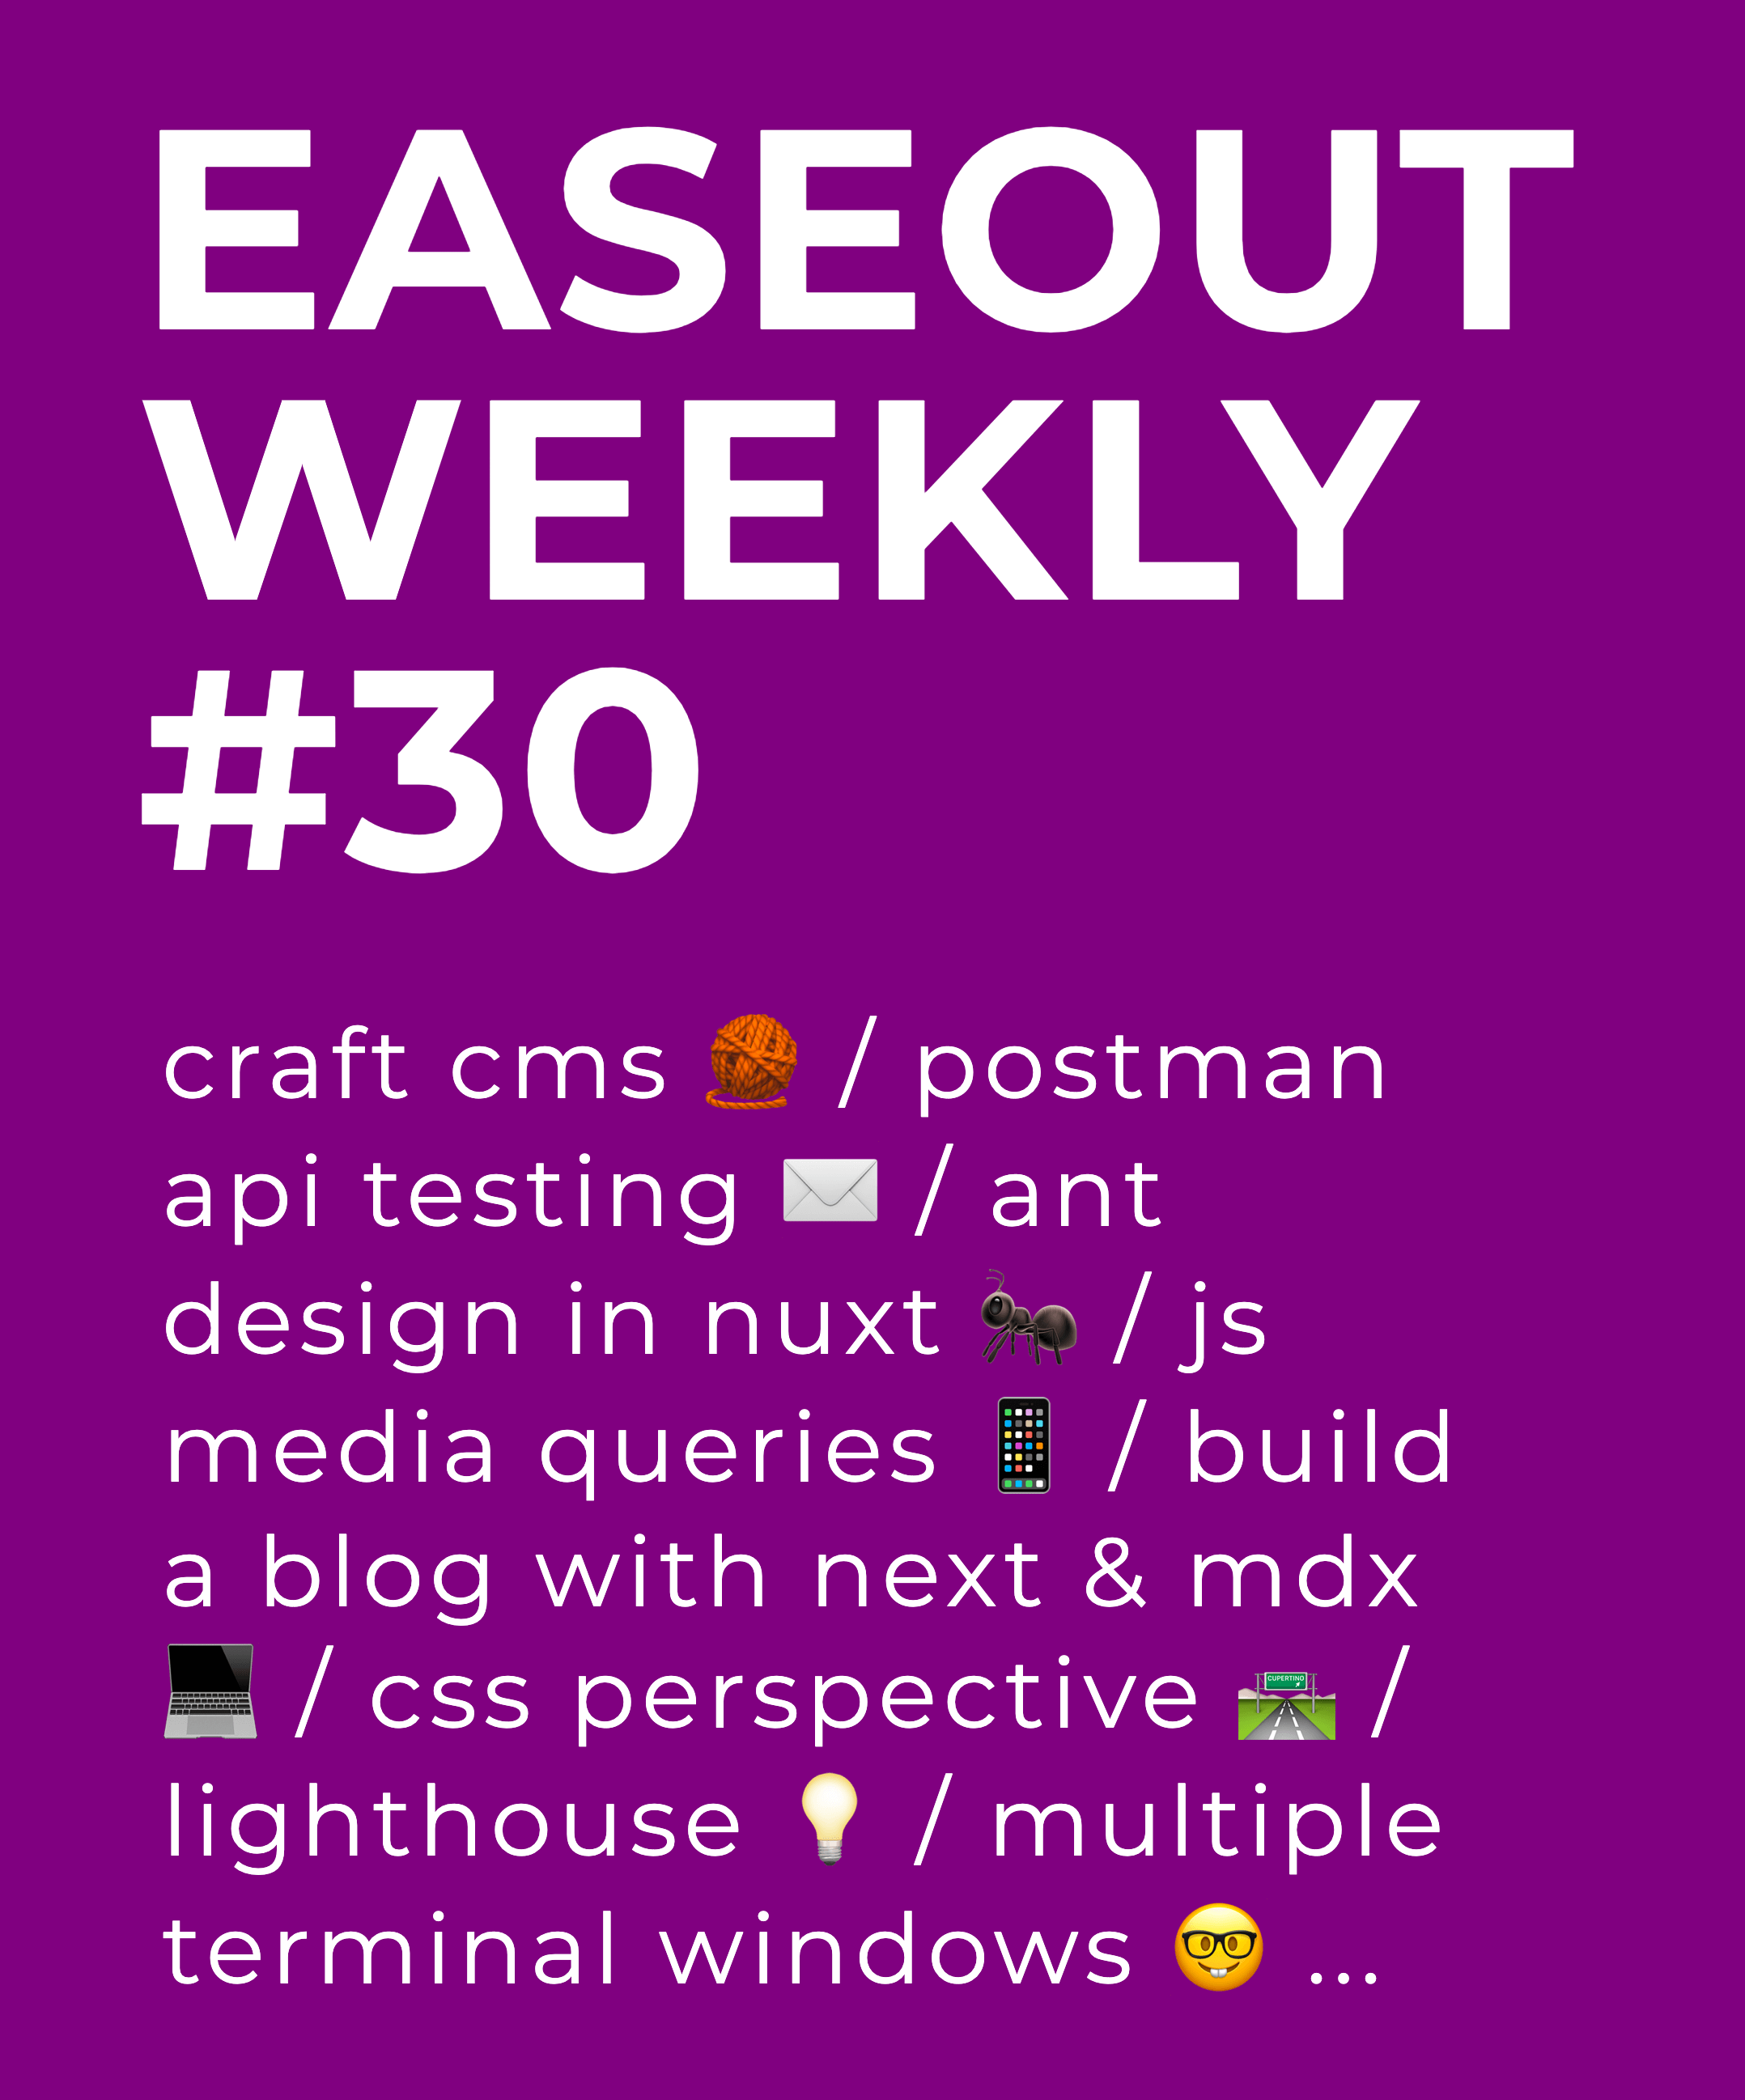 Easeout Weekly #30